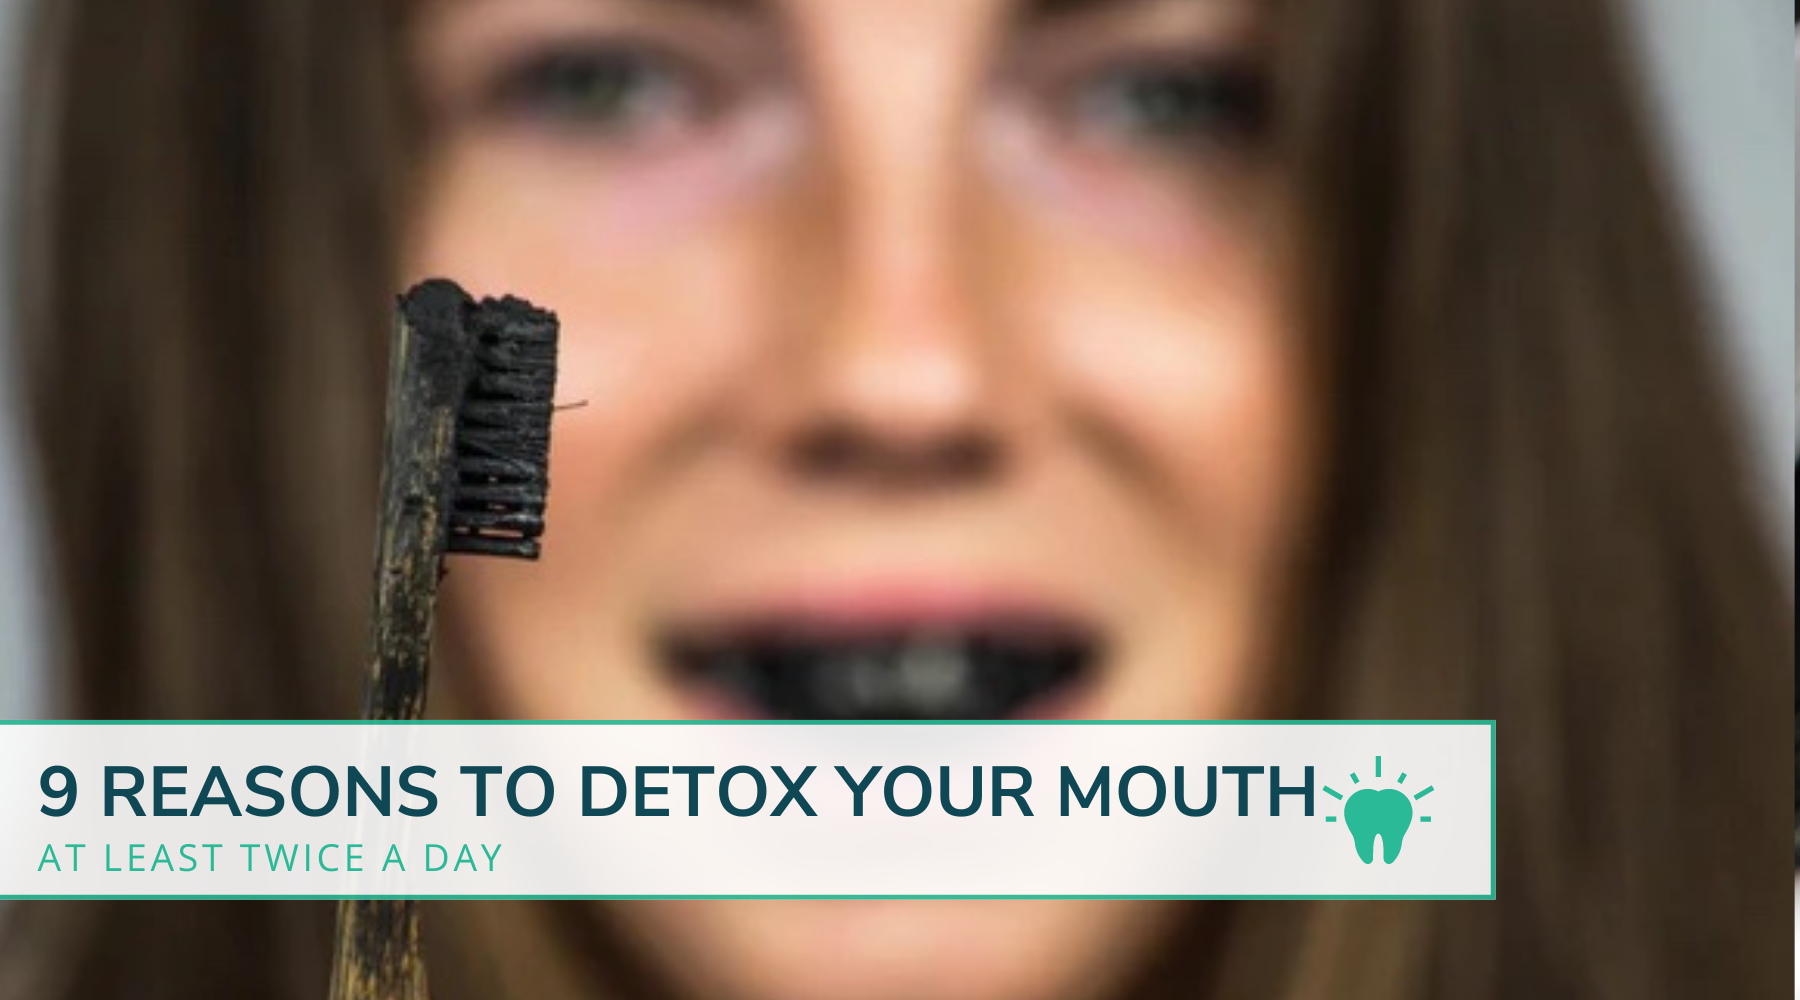 9 REASONS TO DETOX YOUR MOUTH TWICE A DAY